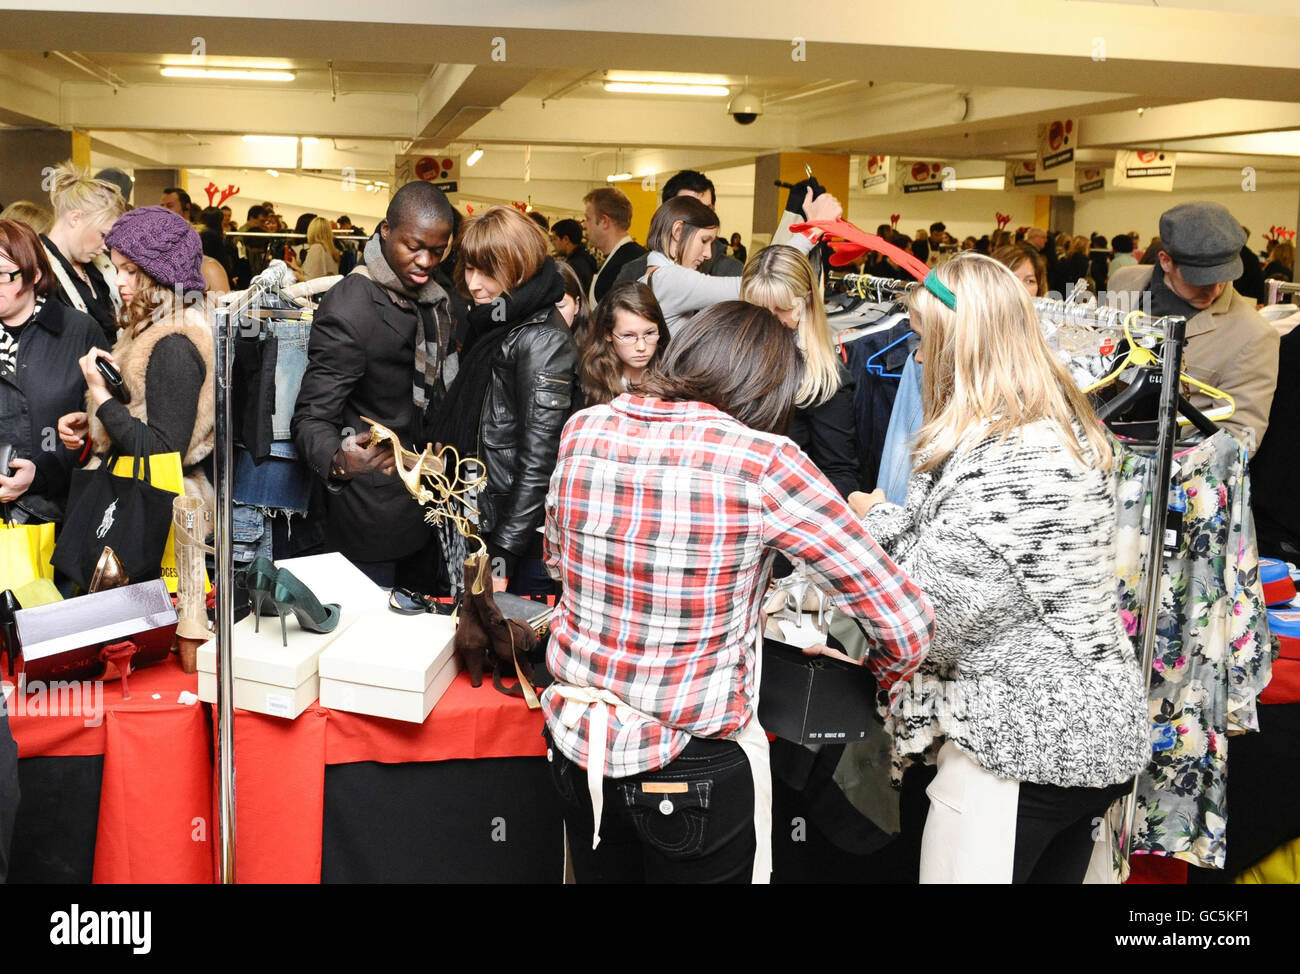 Shoppers at Louise Redknapp's stall at the Mothers4Children Really, Really Great Garage Sale at Selfridges in London. Stock Photo